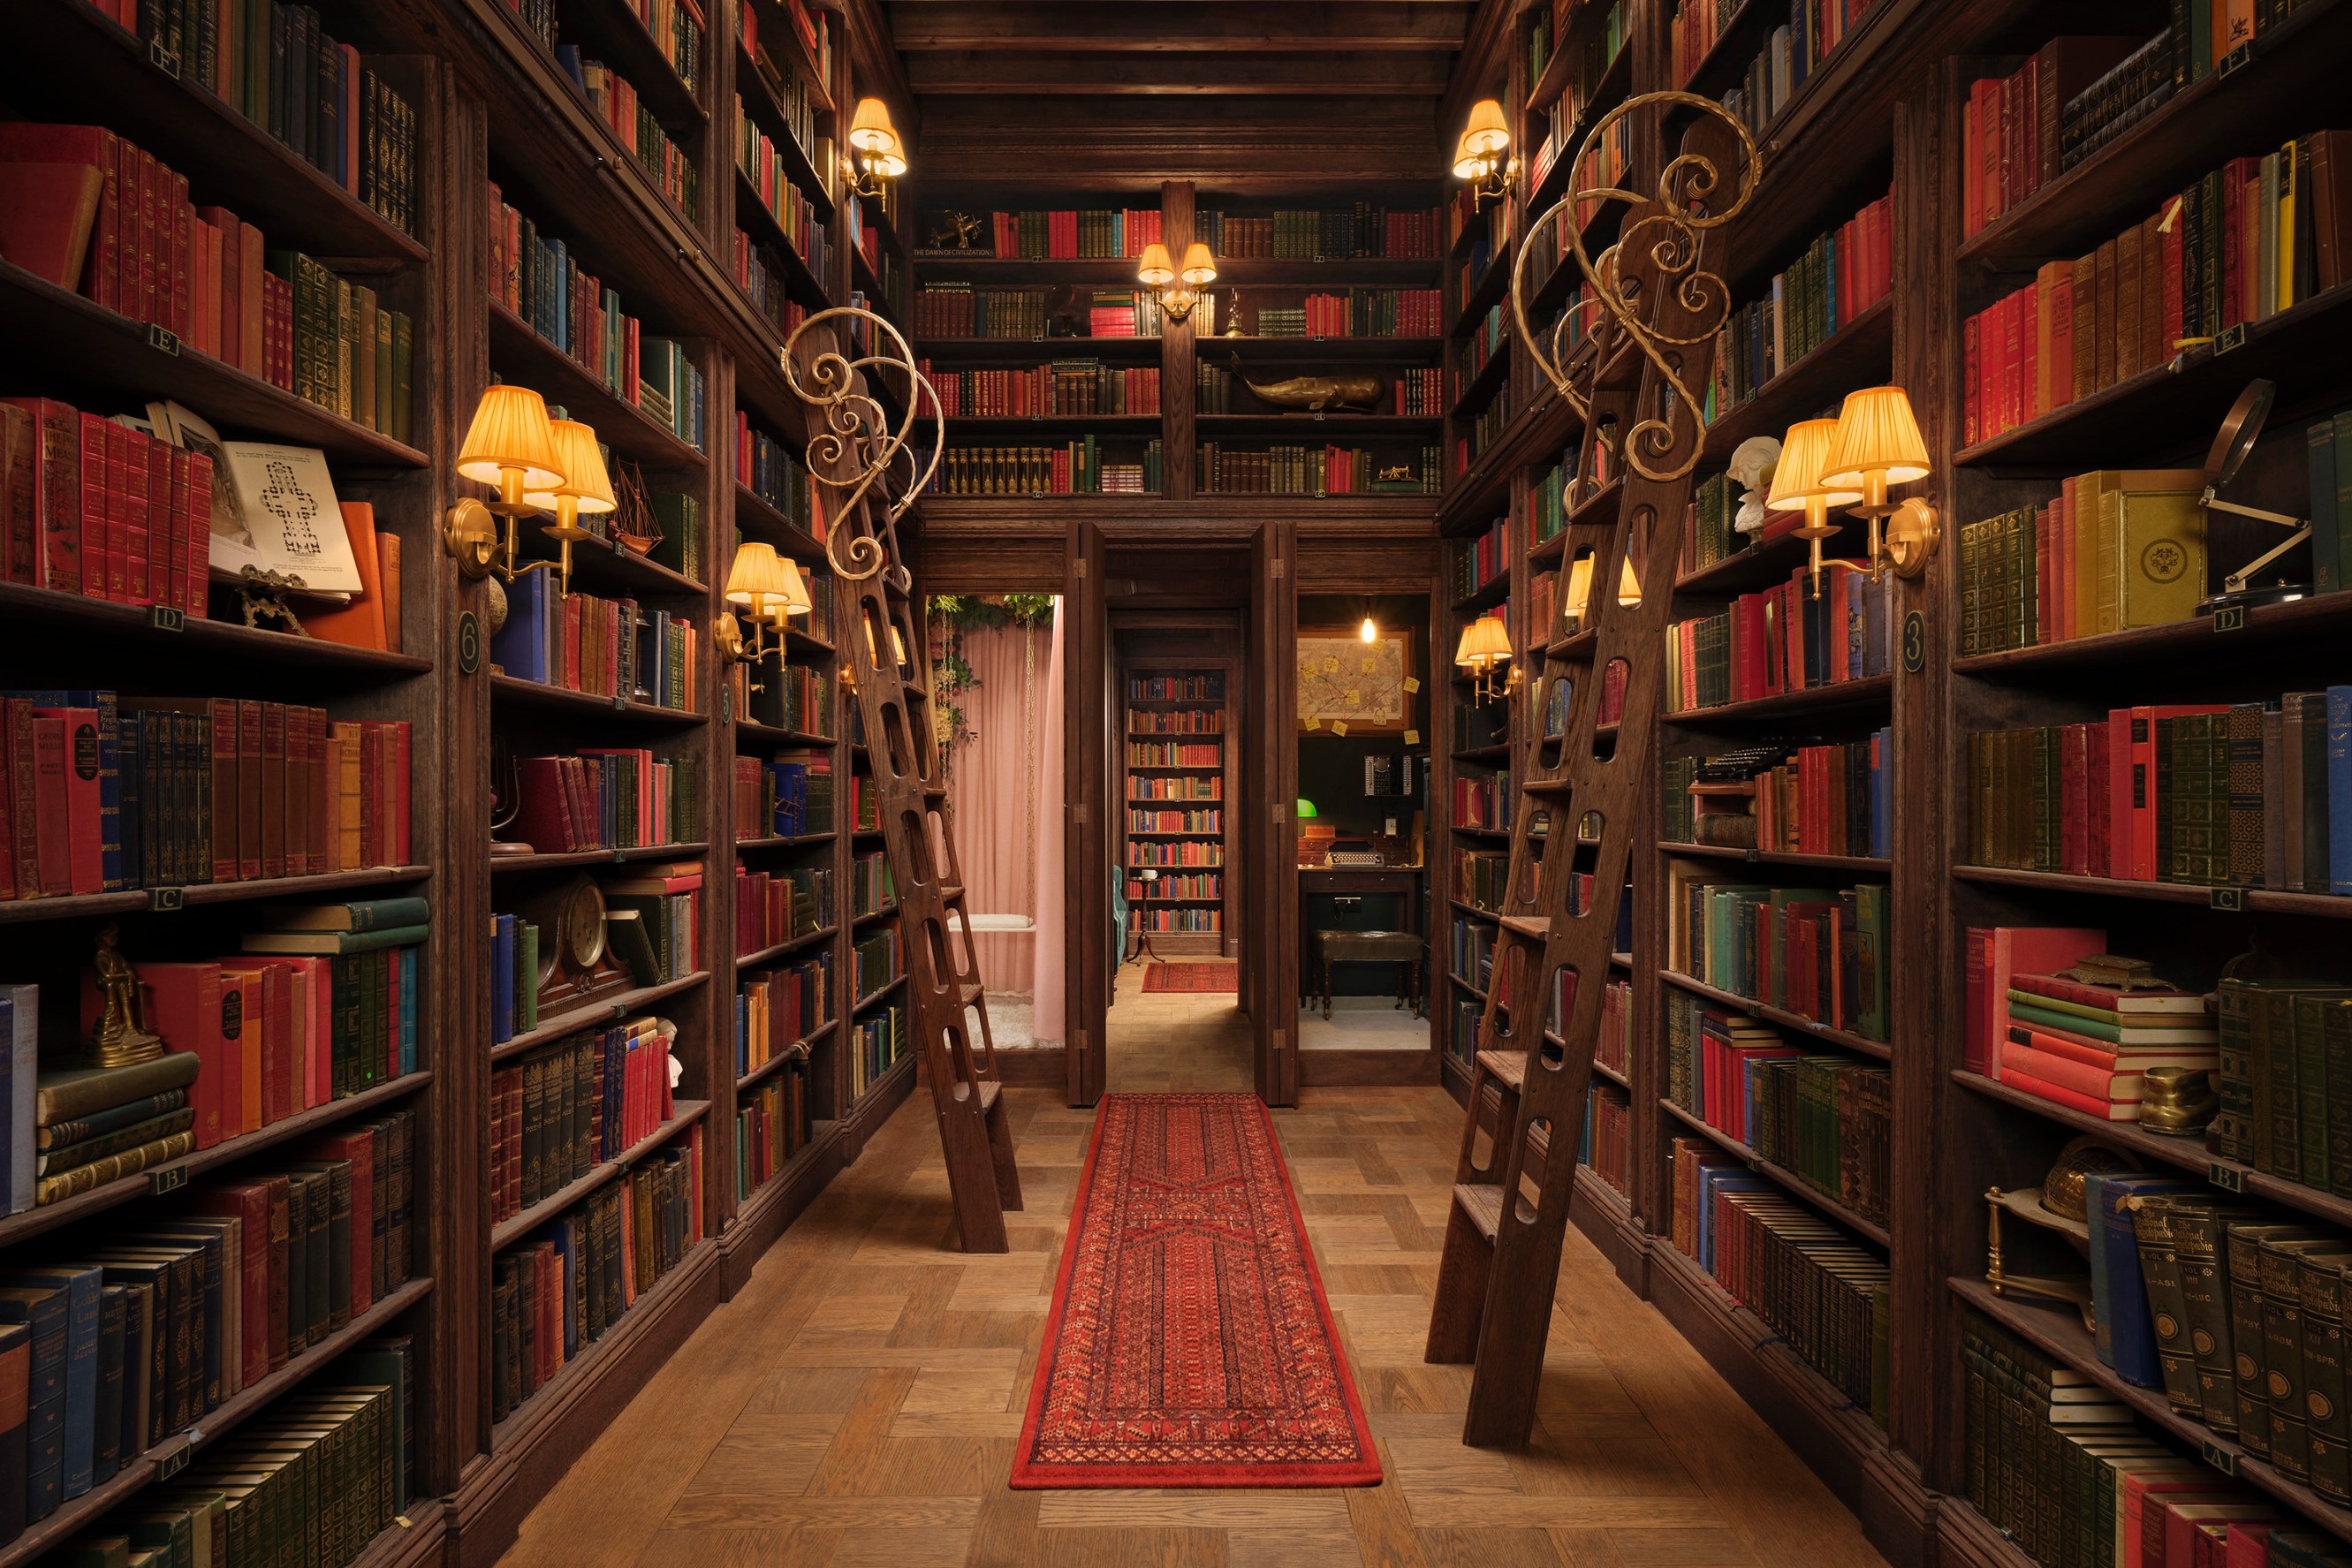 Shot of the book-lined interior of the stay, showing just some of the specially curated collection of over 22,000 books.